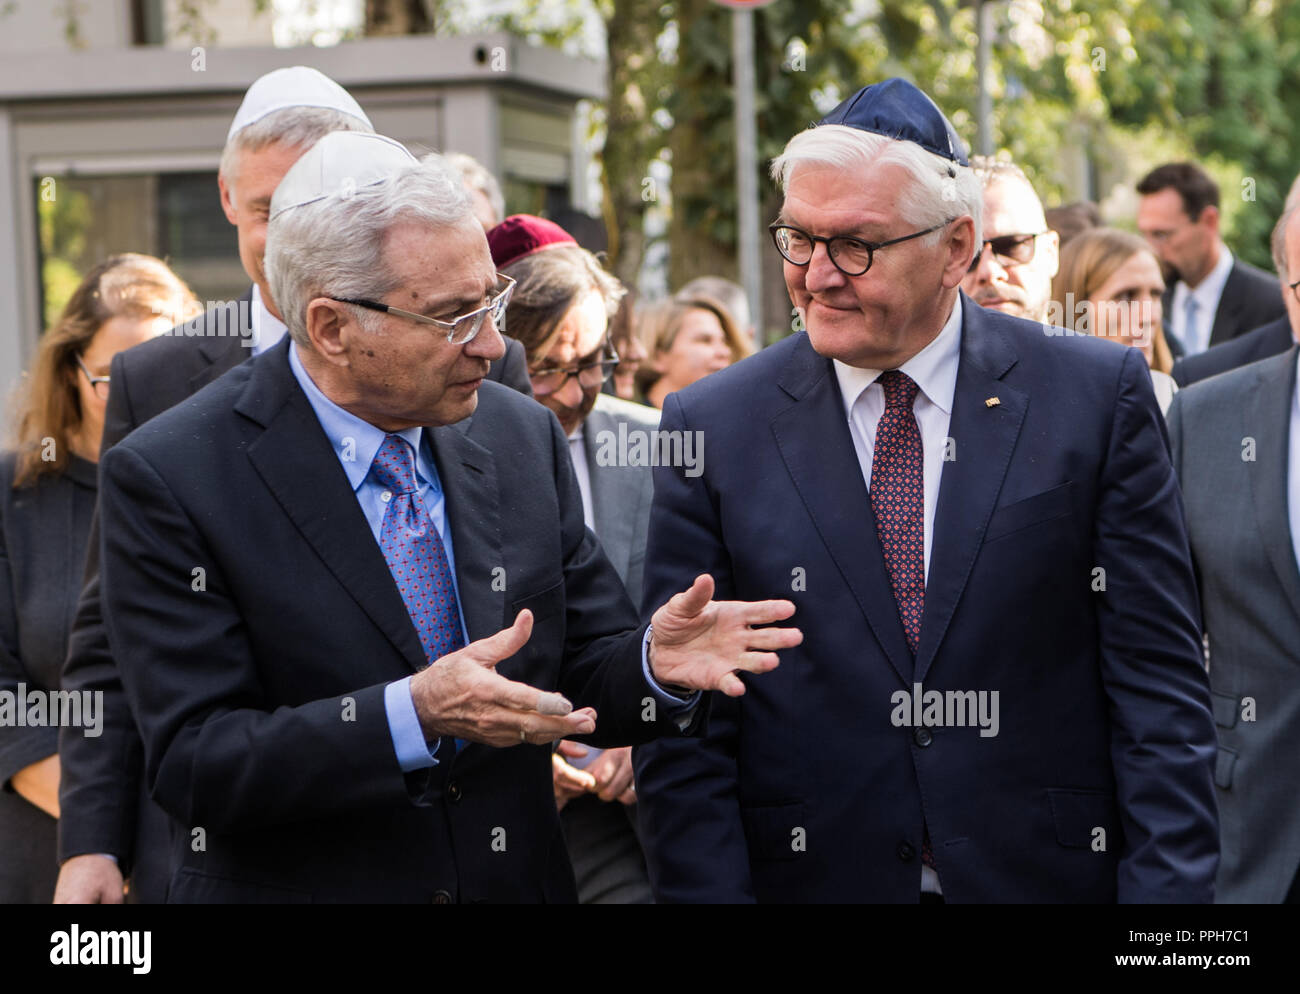 26 September 2018, Hessen, Frankfurt/Main: Salomon Korn (L), Chairman of  the Executive Board of the Jewish Community Frankfurt, talks to  Frank-Walter Steinmeier, Federal President, during a visit to the Westend  Synagogue. Photo: